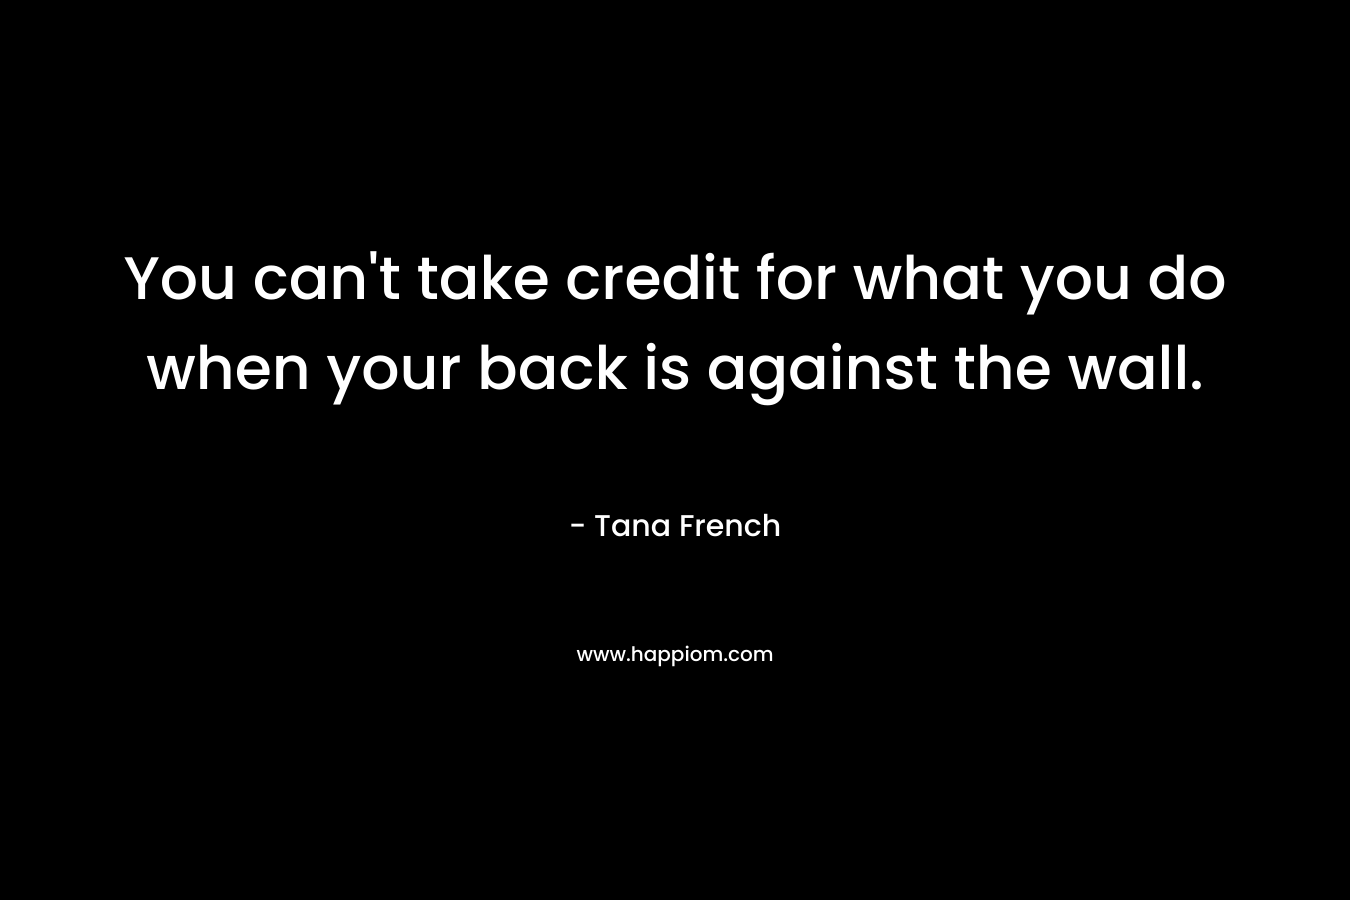 You can’t take credit for what you do when your back is against the wall. – Tana French